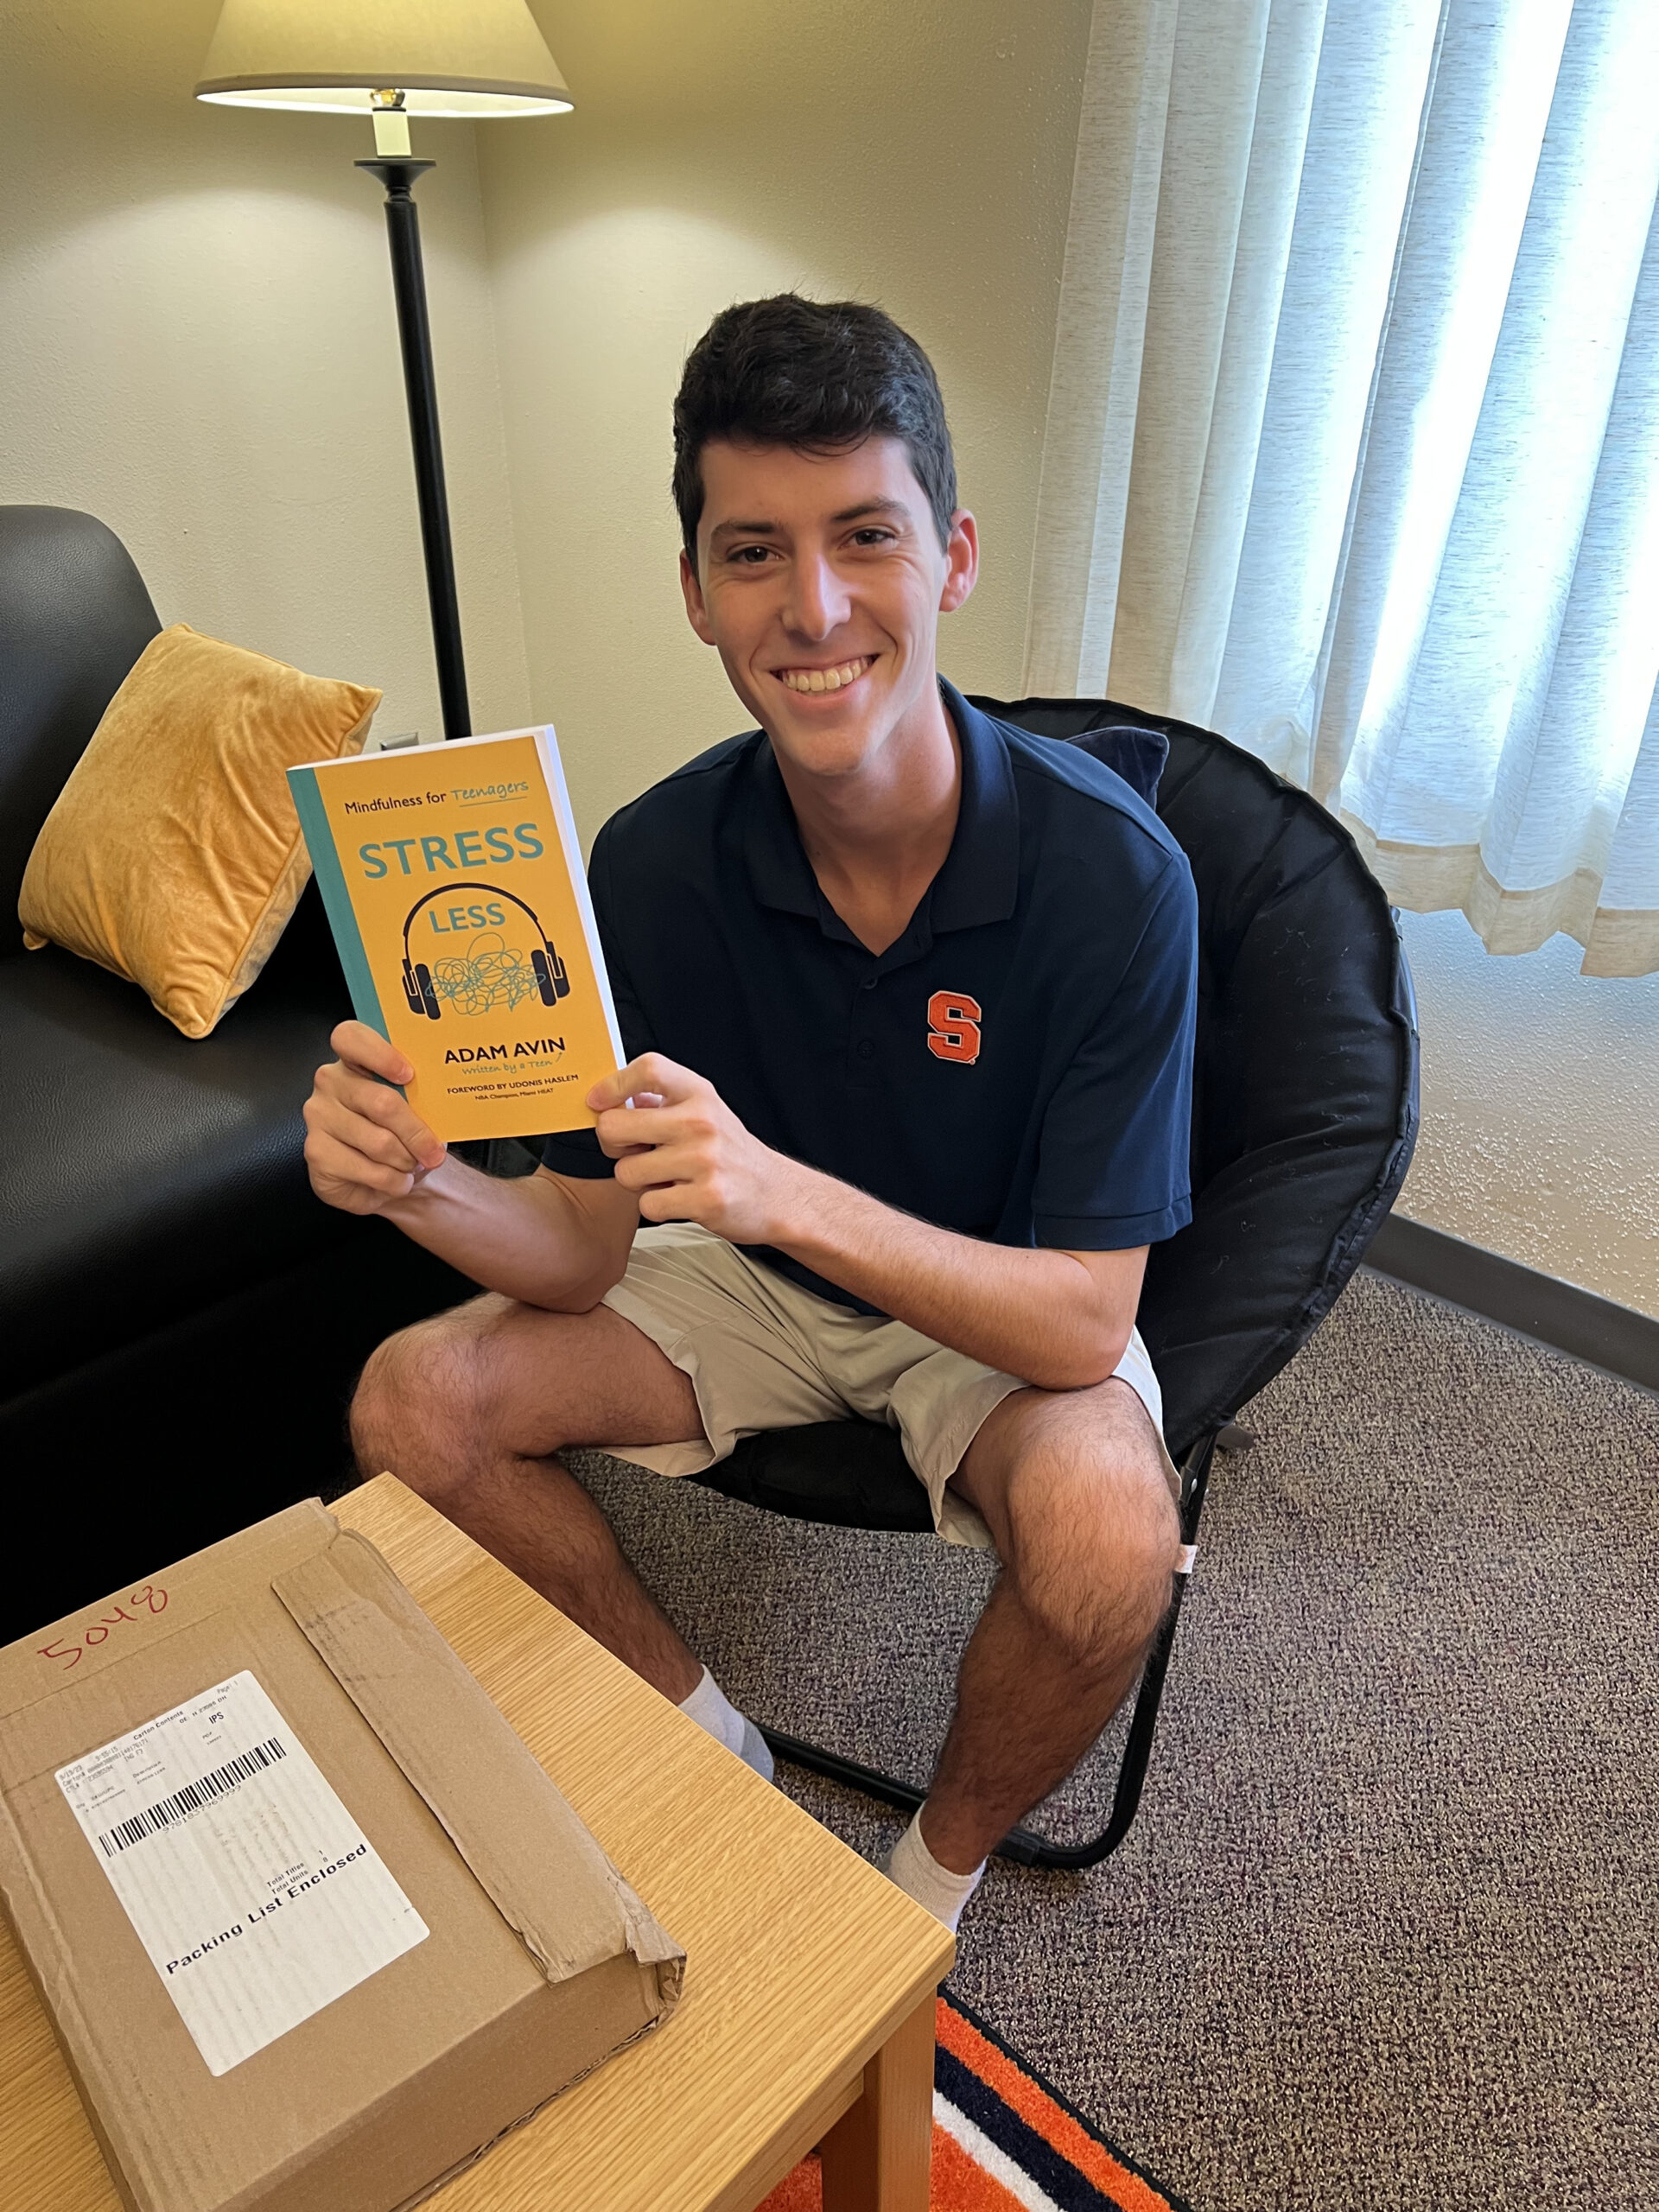 Mental Health Education Advocate, Adam Avin, of the Wuf Shanti Children's Wellness Foundation, releases new book, Stress Less: Mindfulness for Teens, with foreword by Udonis Haslem, 3x NBA Champion, Miami Heat.